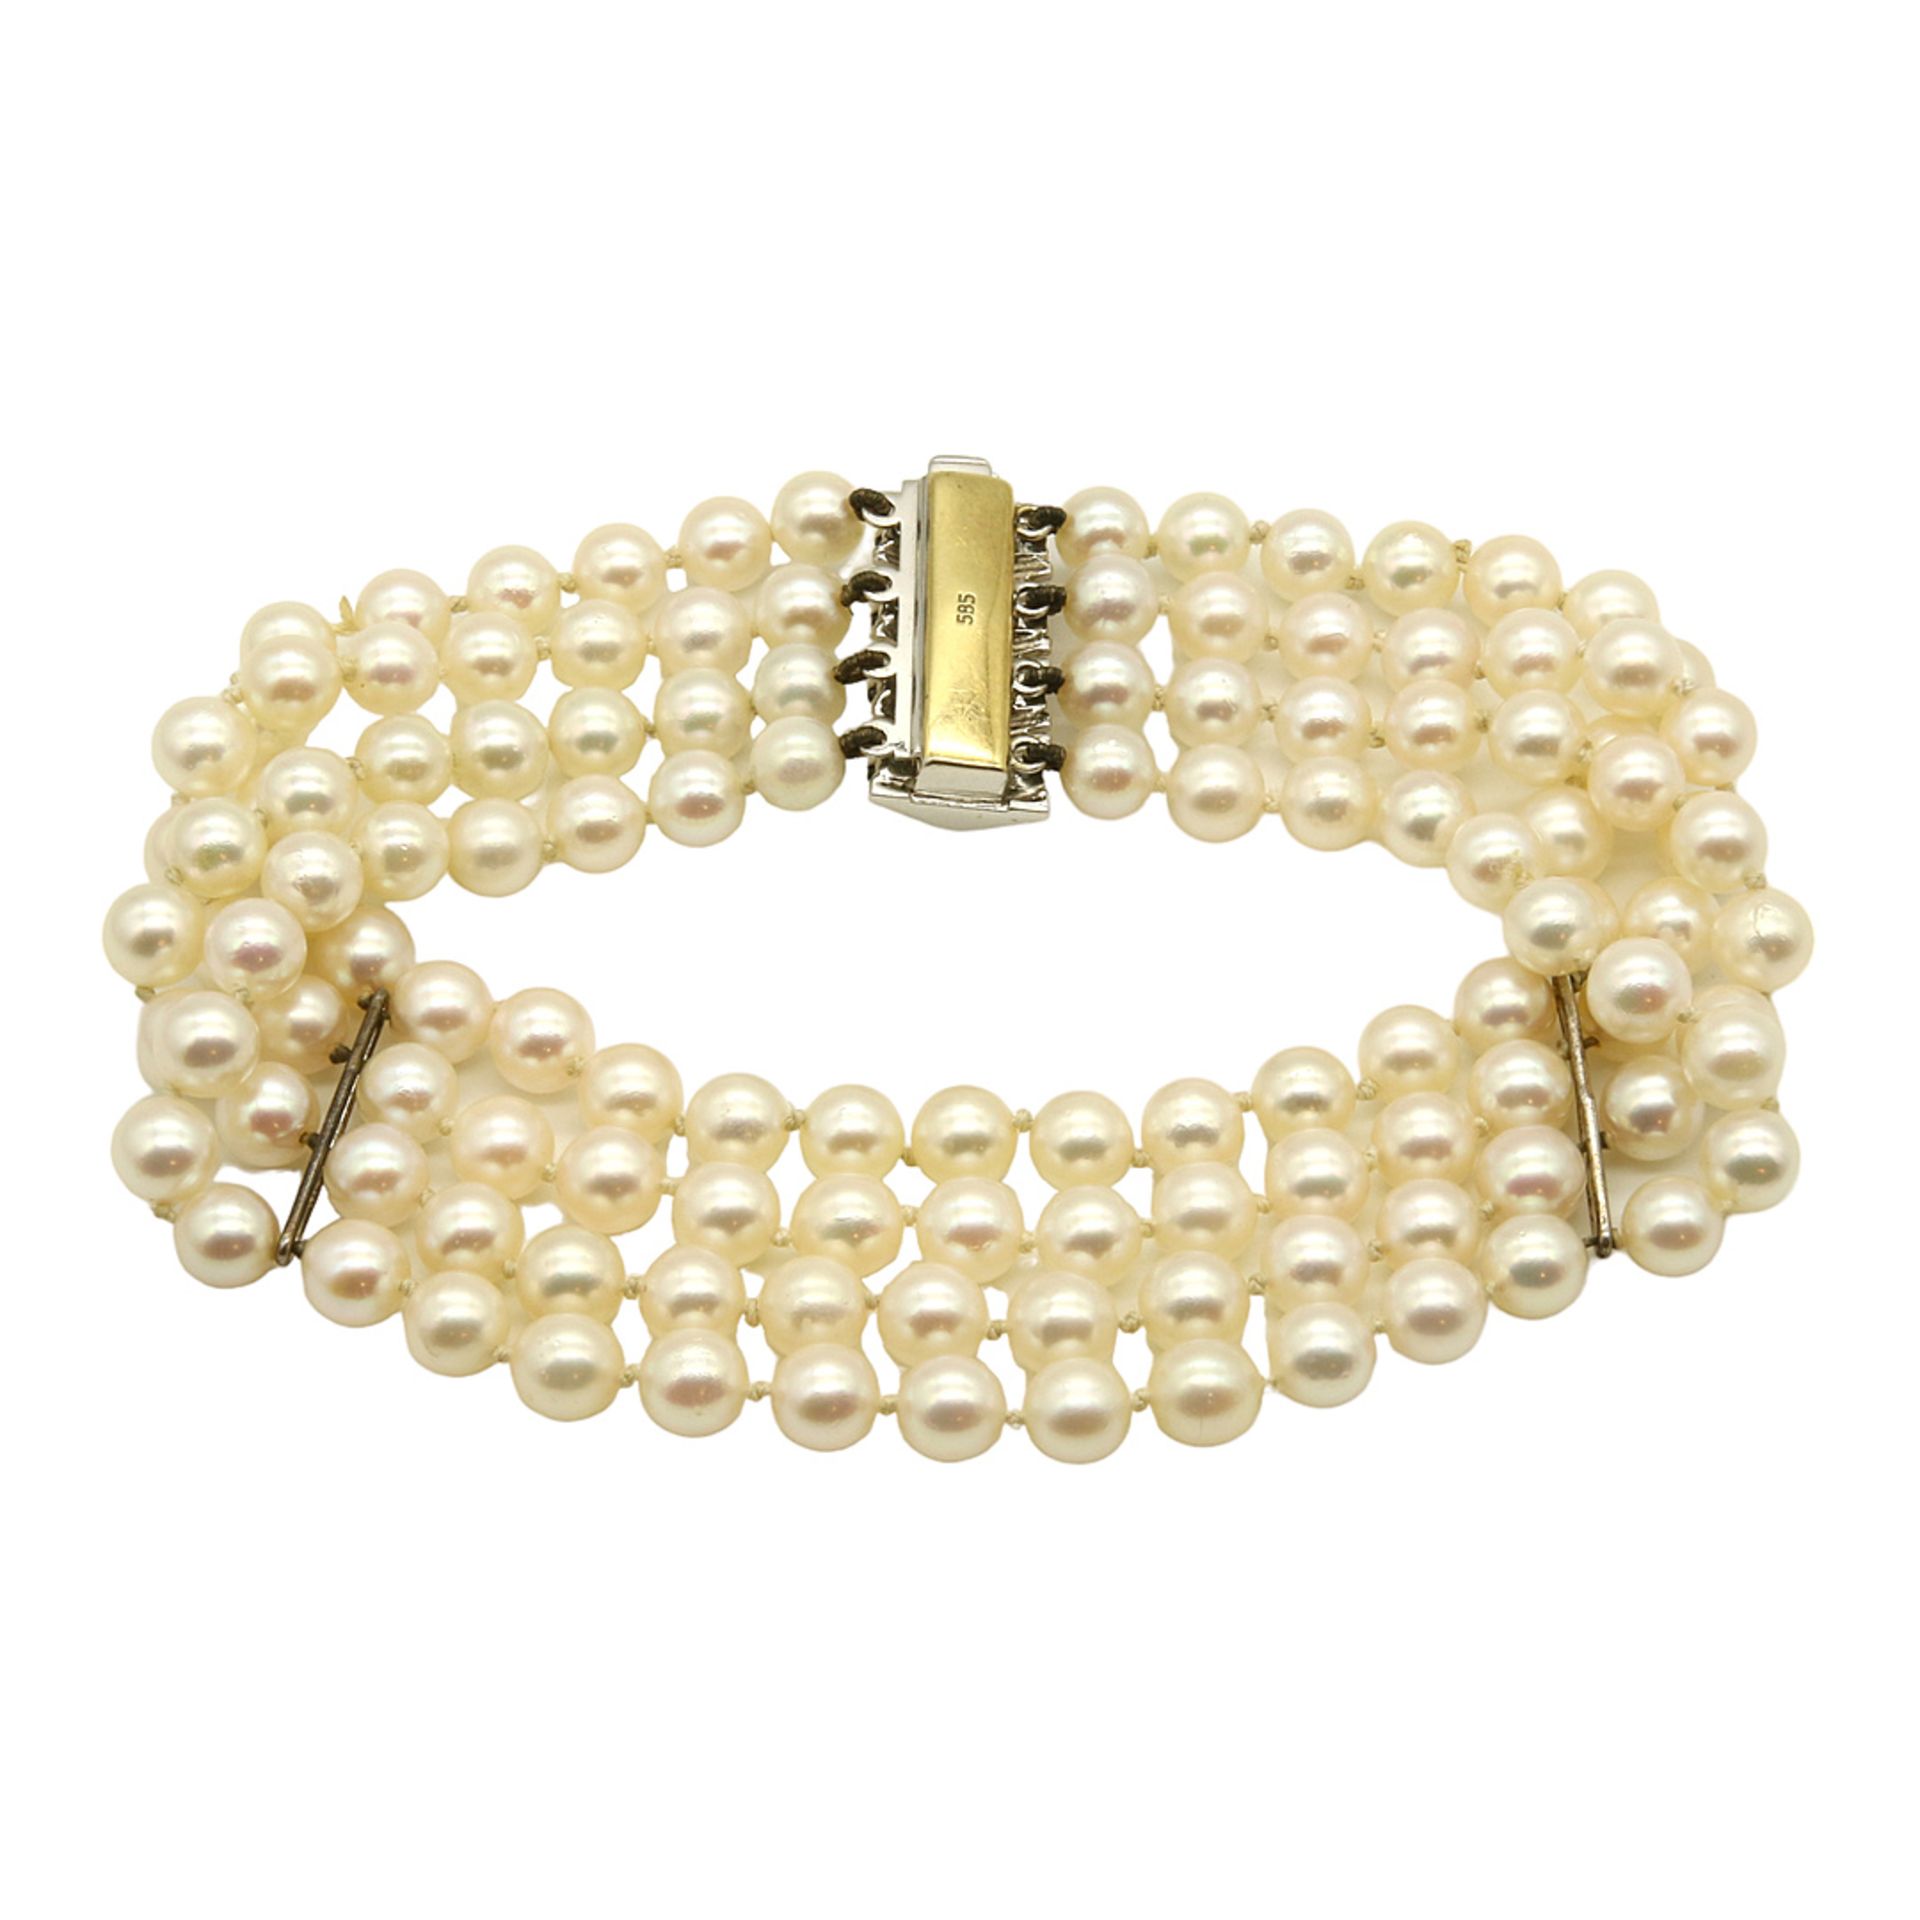 Four-row pearl bracelet with gold clasp - Image 3 of 3